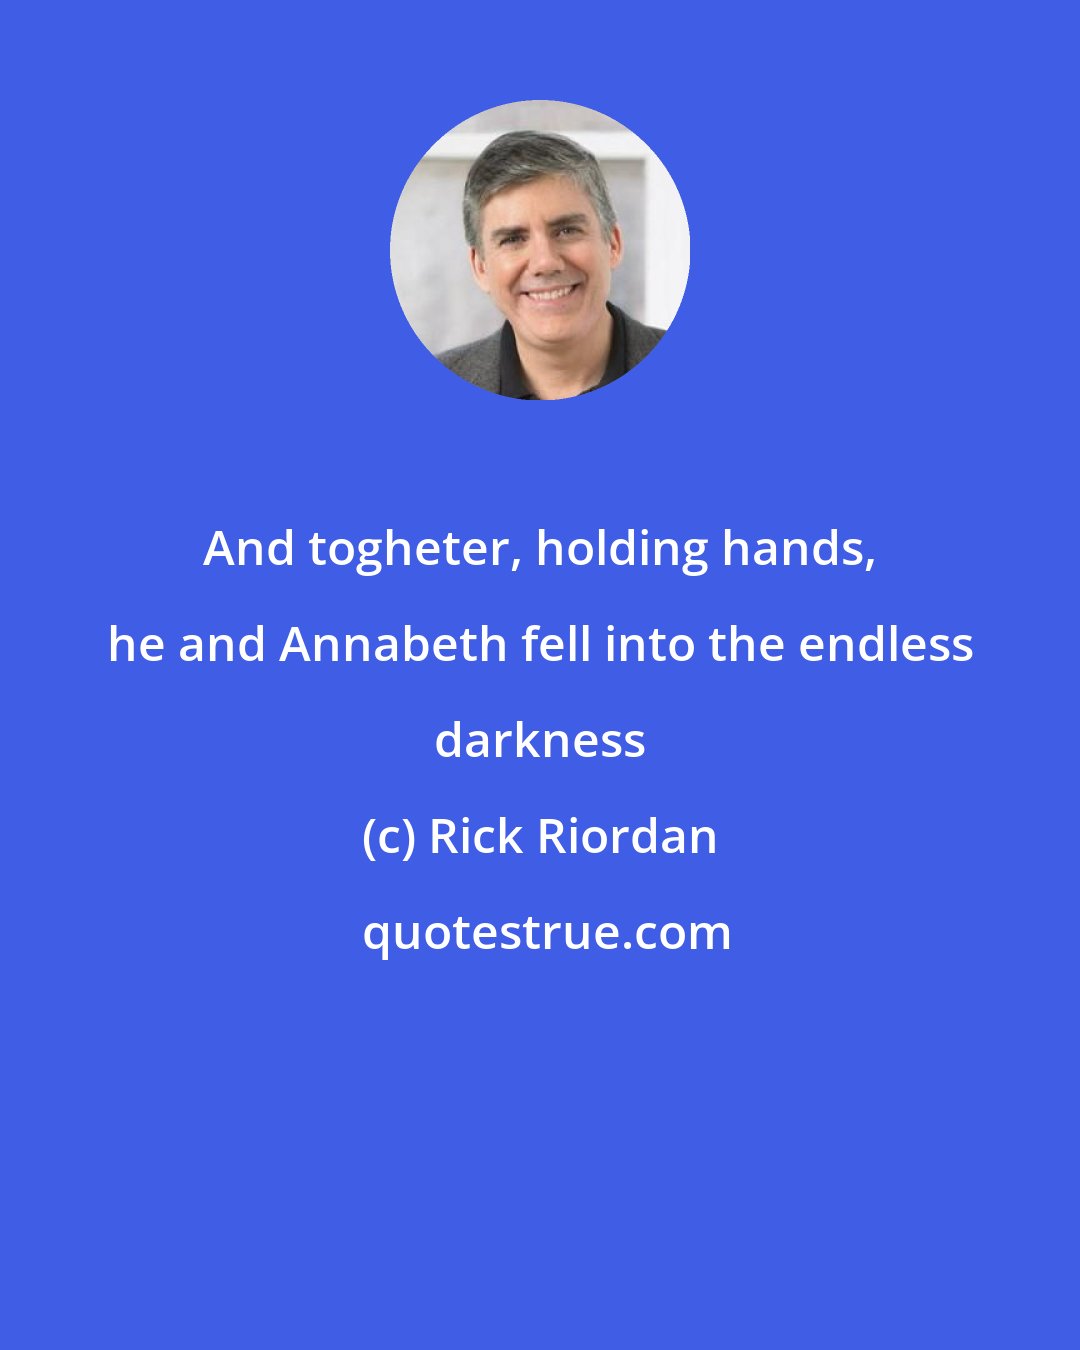 Rick Riordan: And togheter, holding hands, he and Annabeth fell into the endless darkness